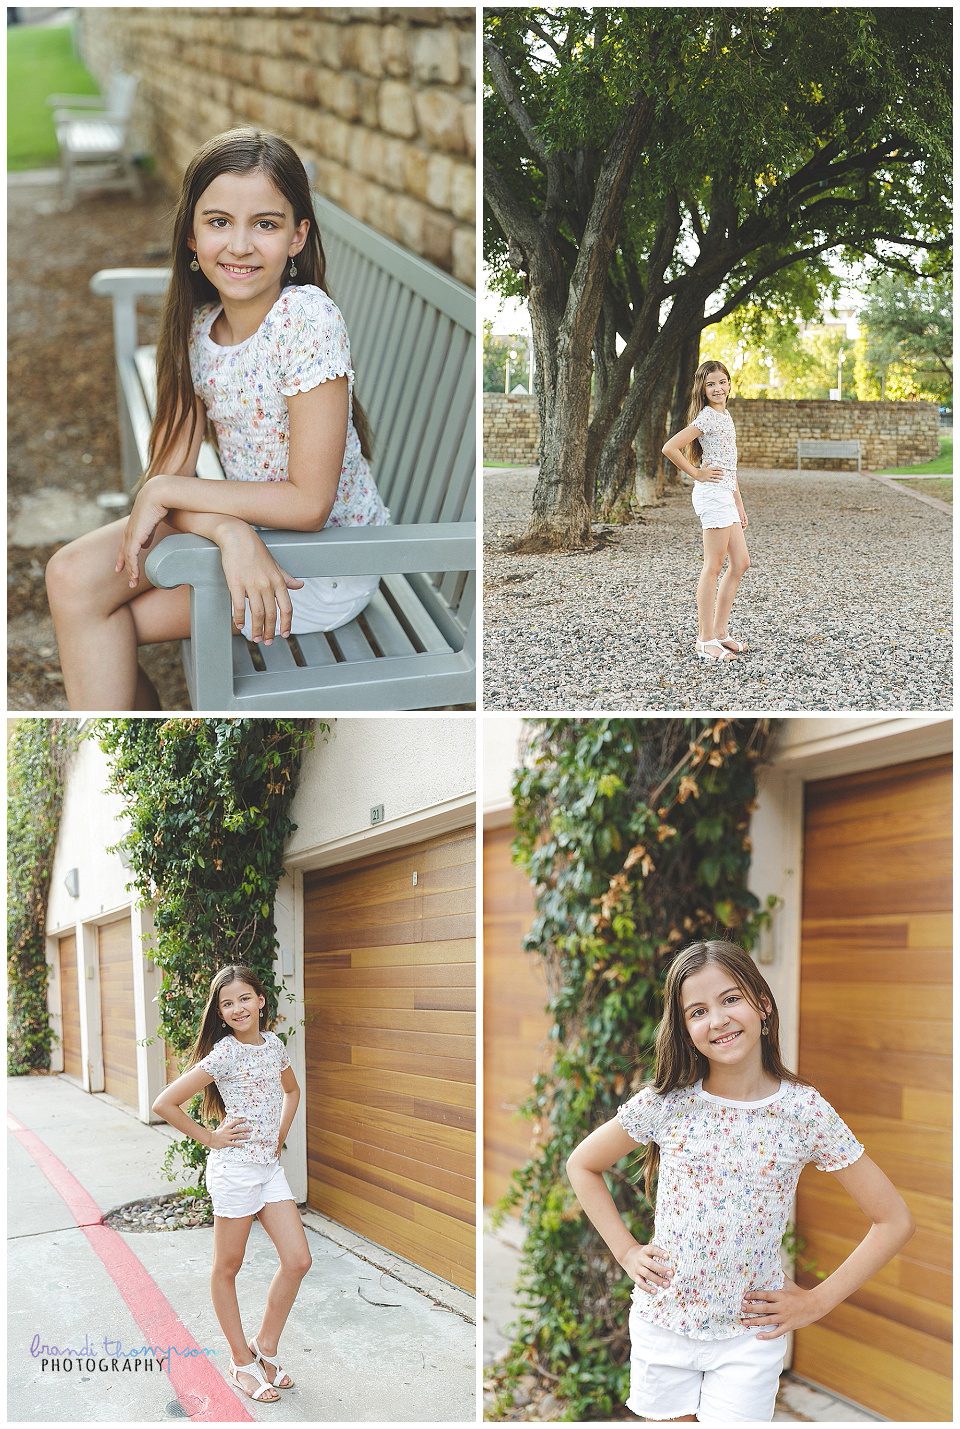 collage of photos of a tween girl with light skin, long brown hair, wearing a white floral shirt and white denim shorts